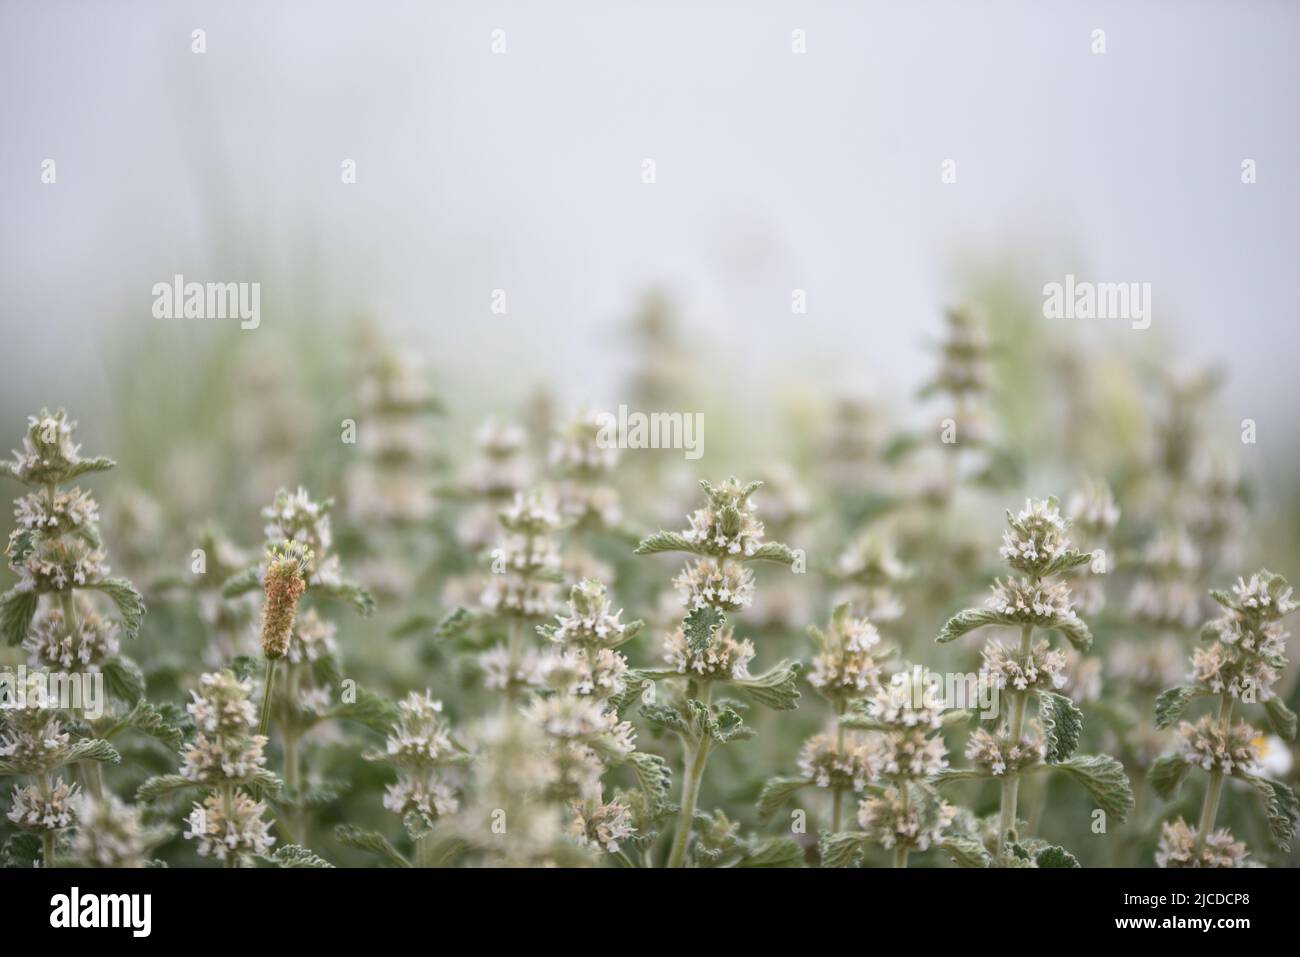 A Common Horehound (Marrubium Vulgare) is seen at a field during spring. According to AEMET, the Spanish meteorological agency, it was the fourth driest spring since 1961, and the second driest of the 21st century, only behind 2005. Precipitation in the country as a whole was 33% below normal and the average temperature was 12.5ºC. This temperature was 0.4ºC higher than the average of last decades. Stock Photo